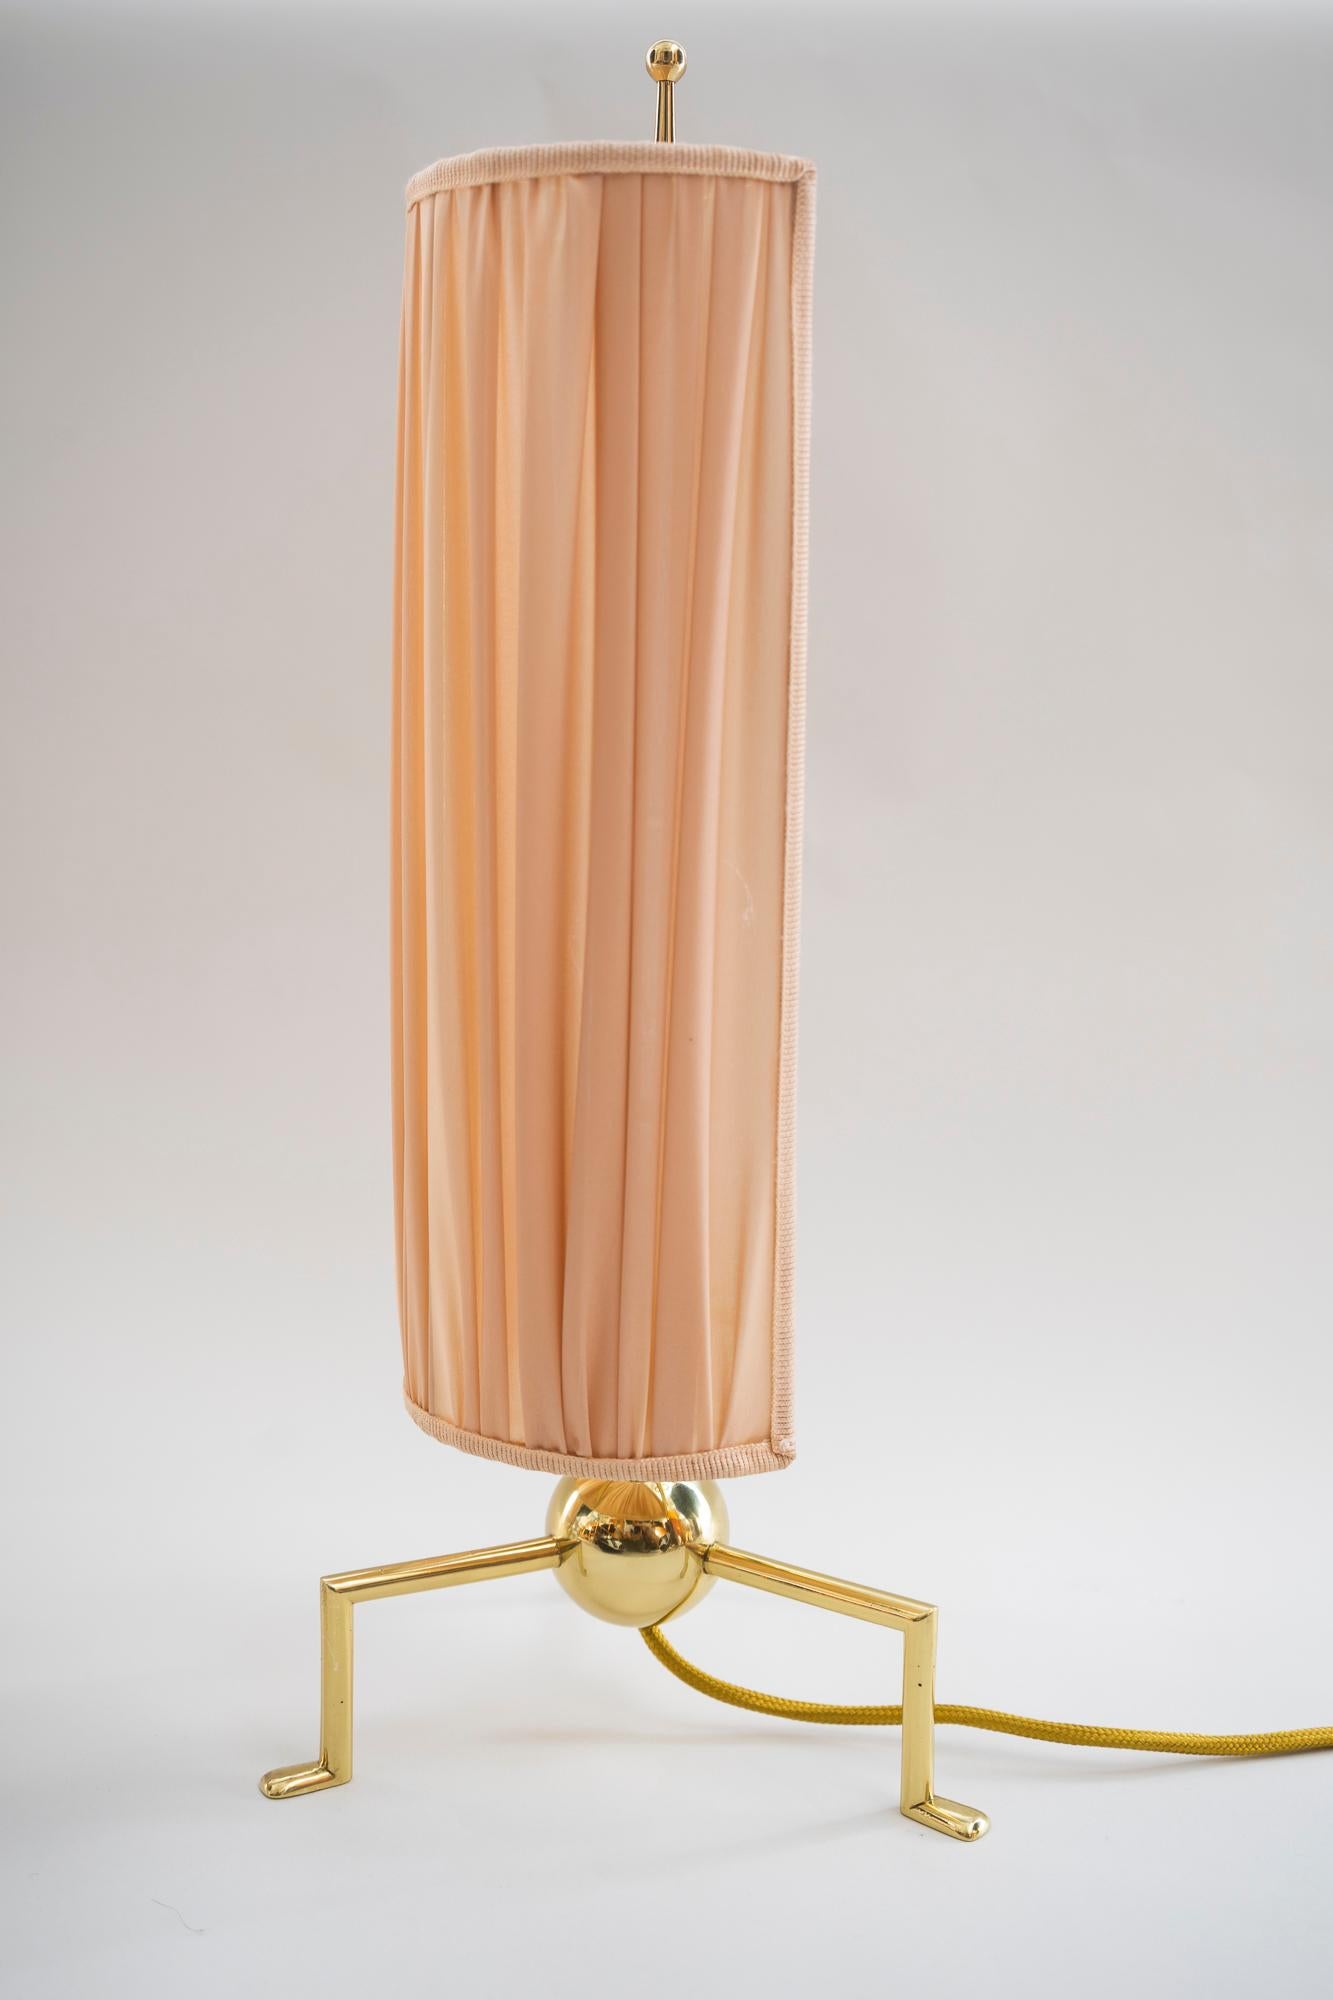 Two Exclusive and Rare Art Deco Table Lamp, Vienna, 1920s For Sale 2